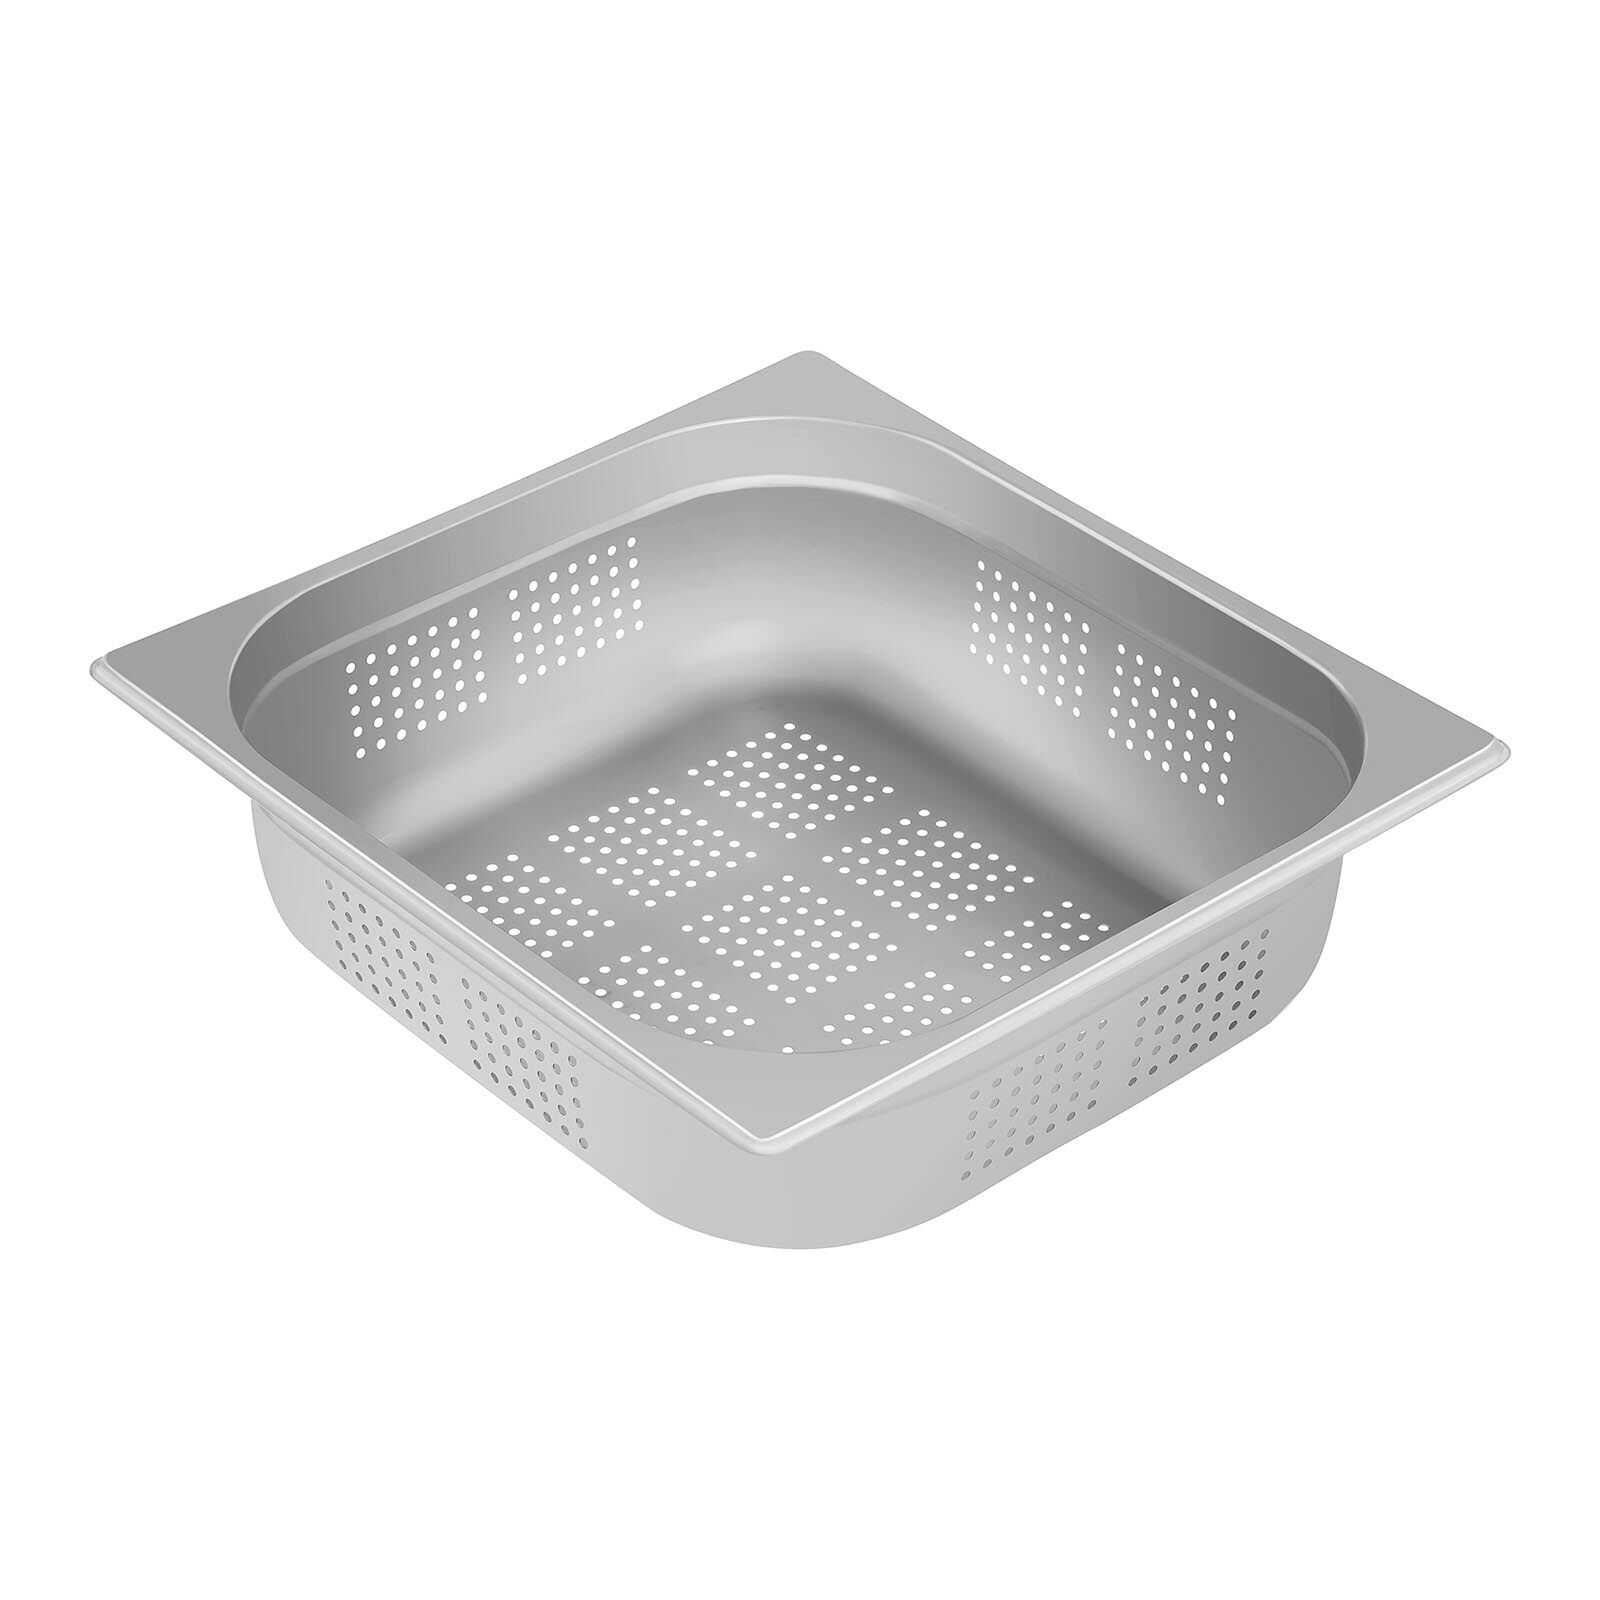 Royal Catering Gastronorm Tray - 2/3 - 100 mm - Perforated